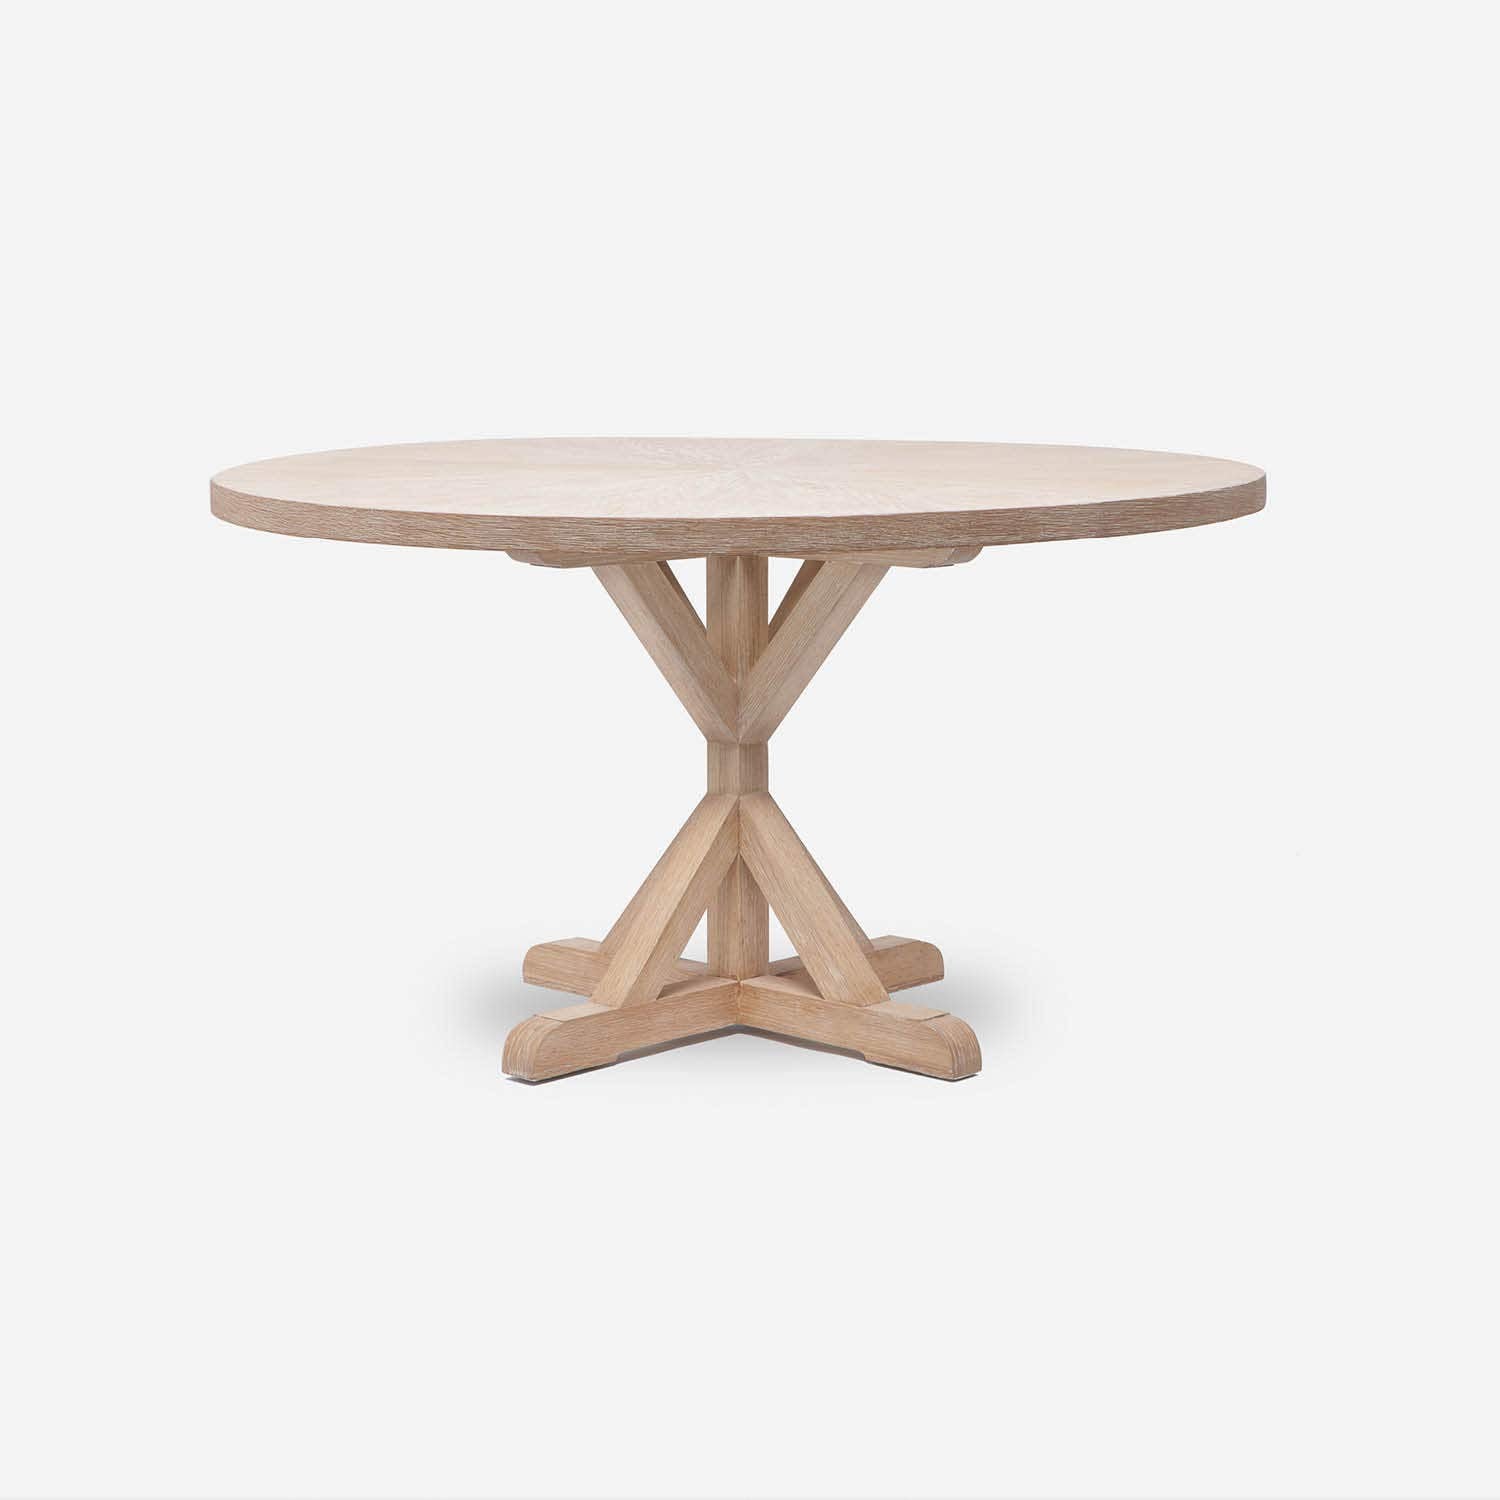 Made Goods Dane 48" x 30" White Cerused Oak Dinning Table With Round White Cerused Oak Table Top